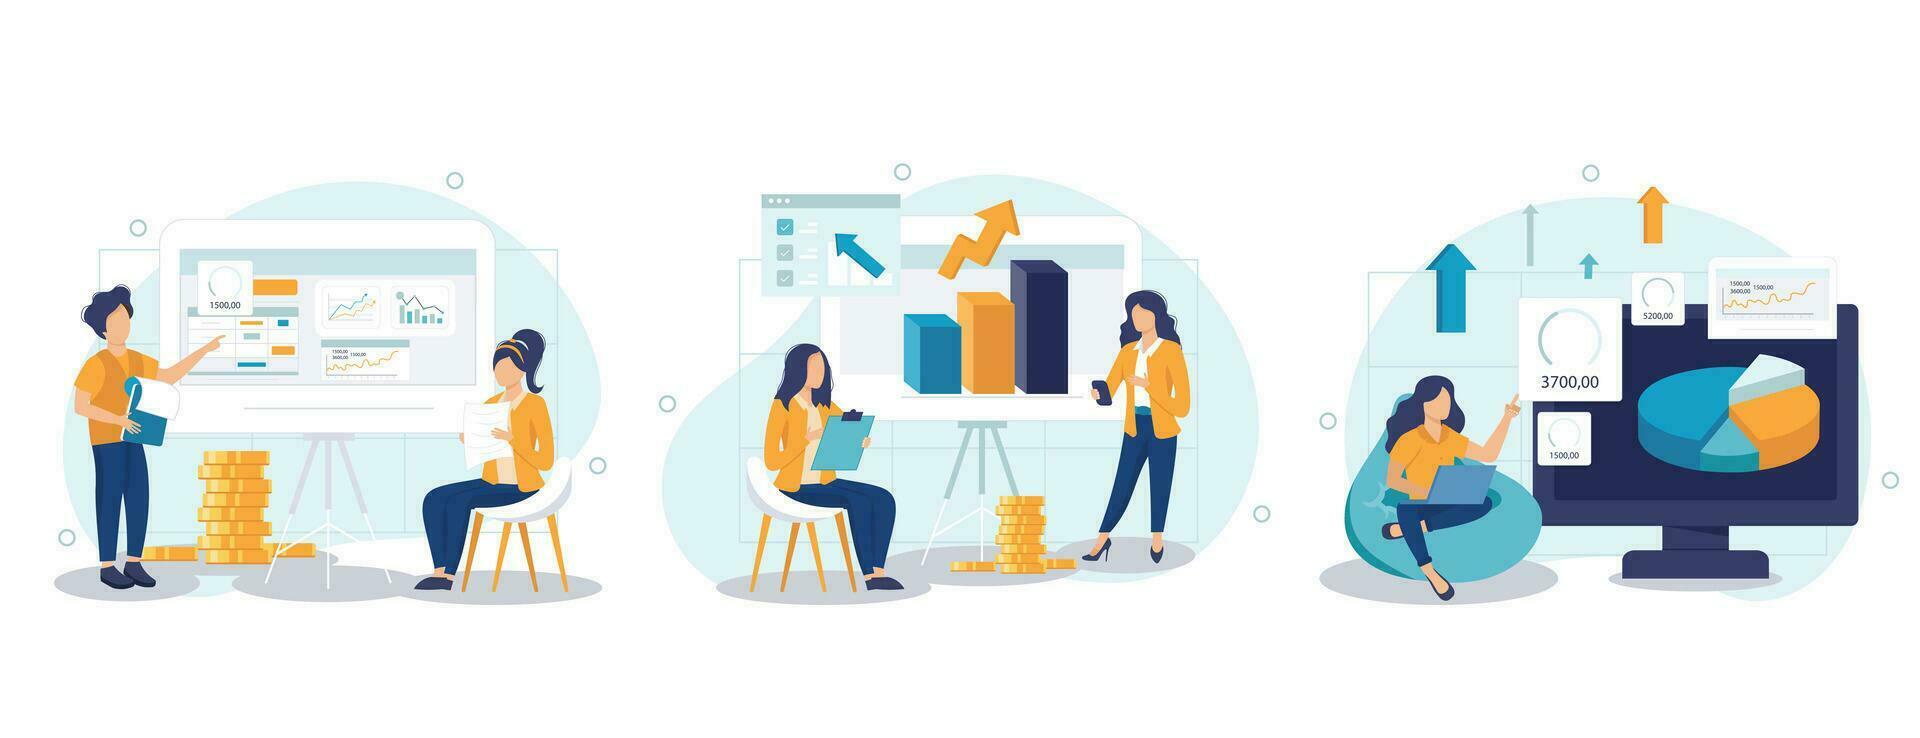 Business process concept isolated person situations. Collection of scenes with people colleagues analyze data, create success strategy, collaborate. Vector illustration in flat design